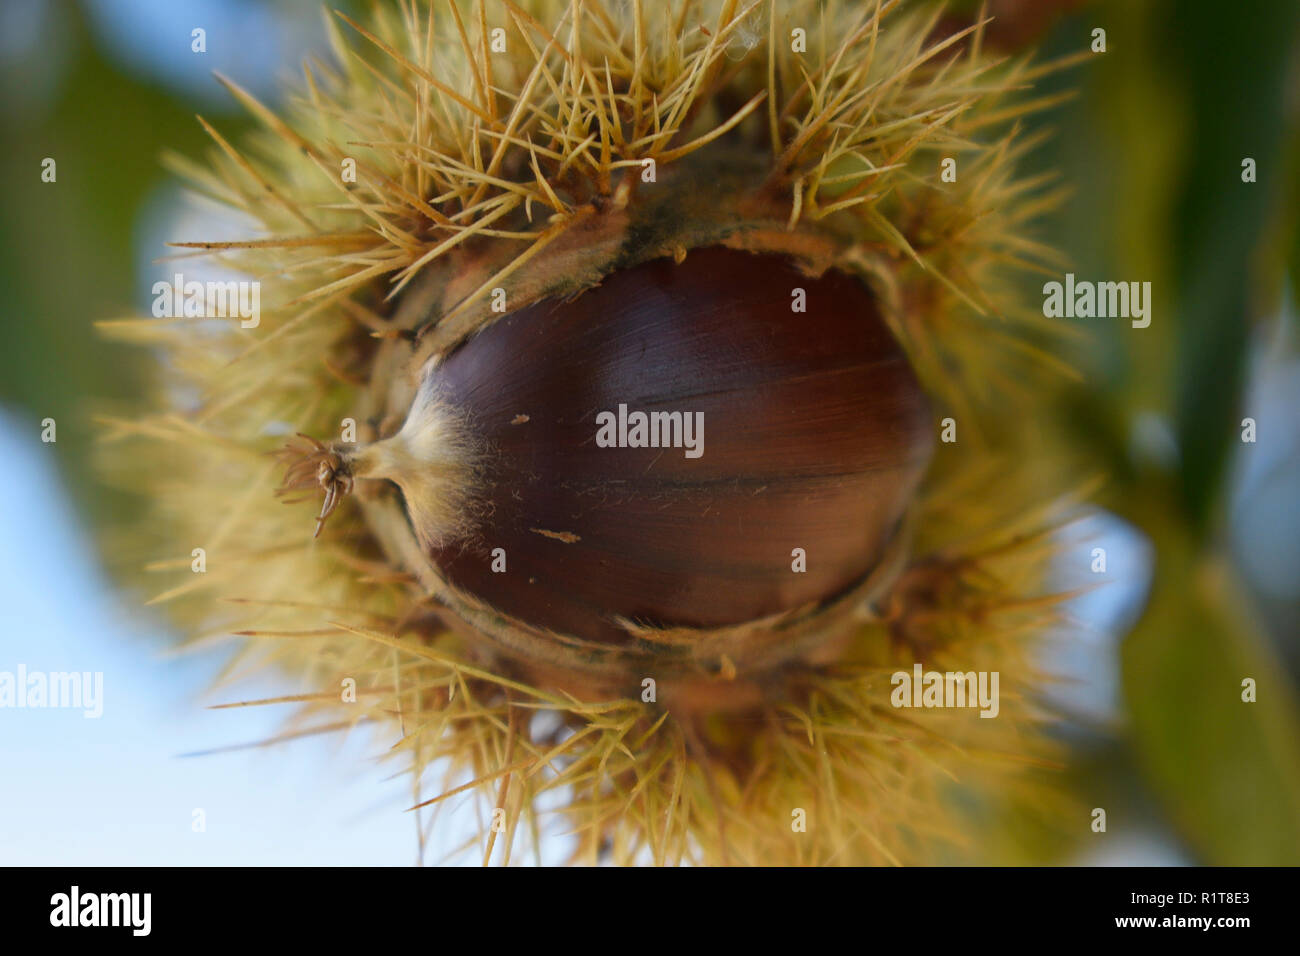 Chestnut ripe fruit inside its pod, protected by its spikes. Detail photography of the chestnut tree fruit. Stock Photo